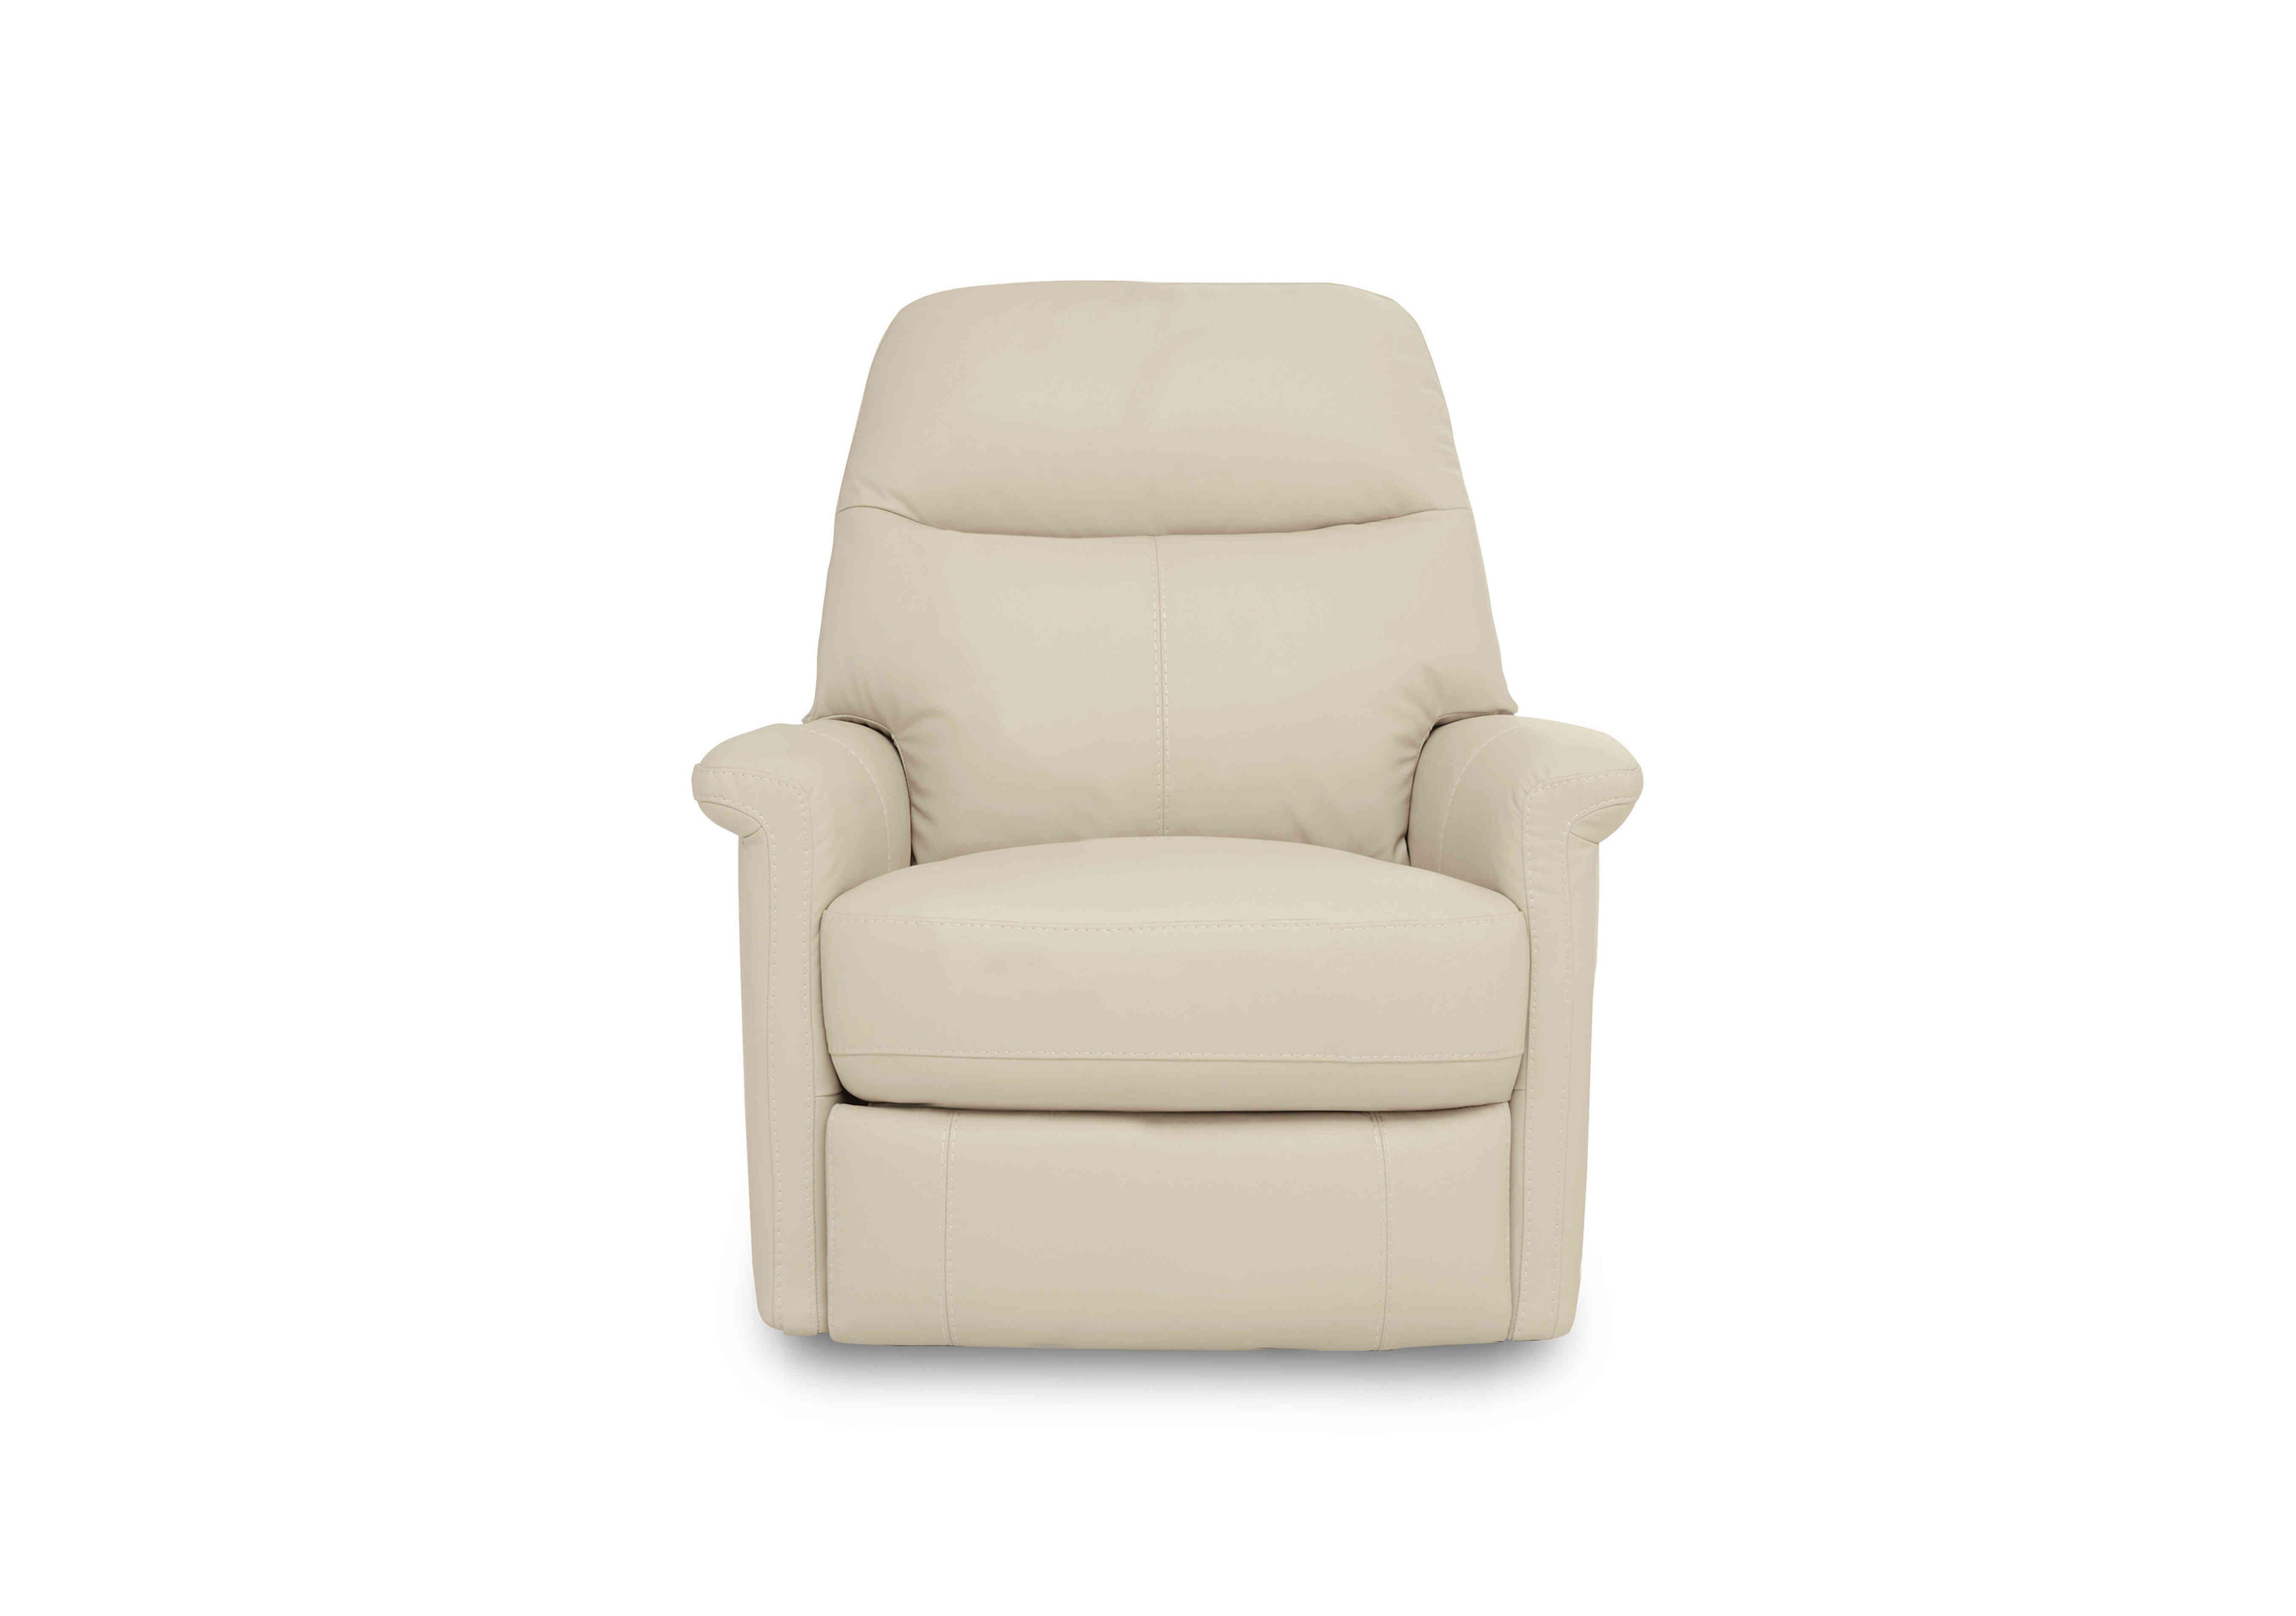 Compact Collection Lille Leather Chair in Bv-862c Bisque on Furniture Village